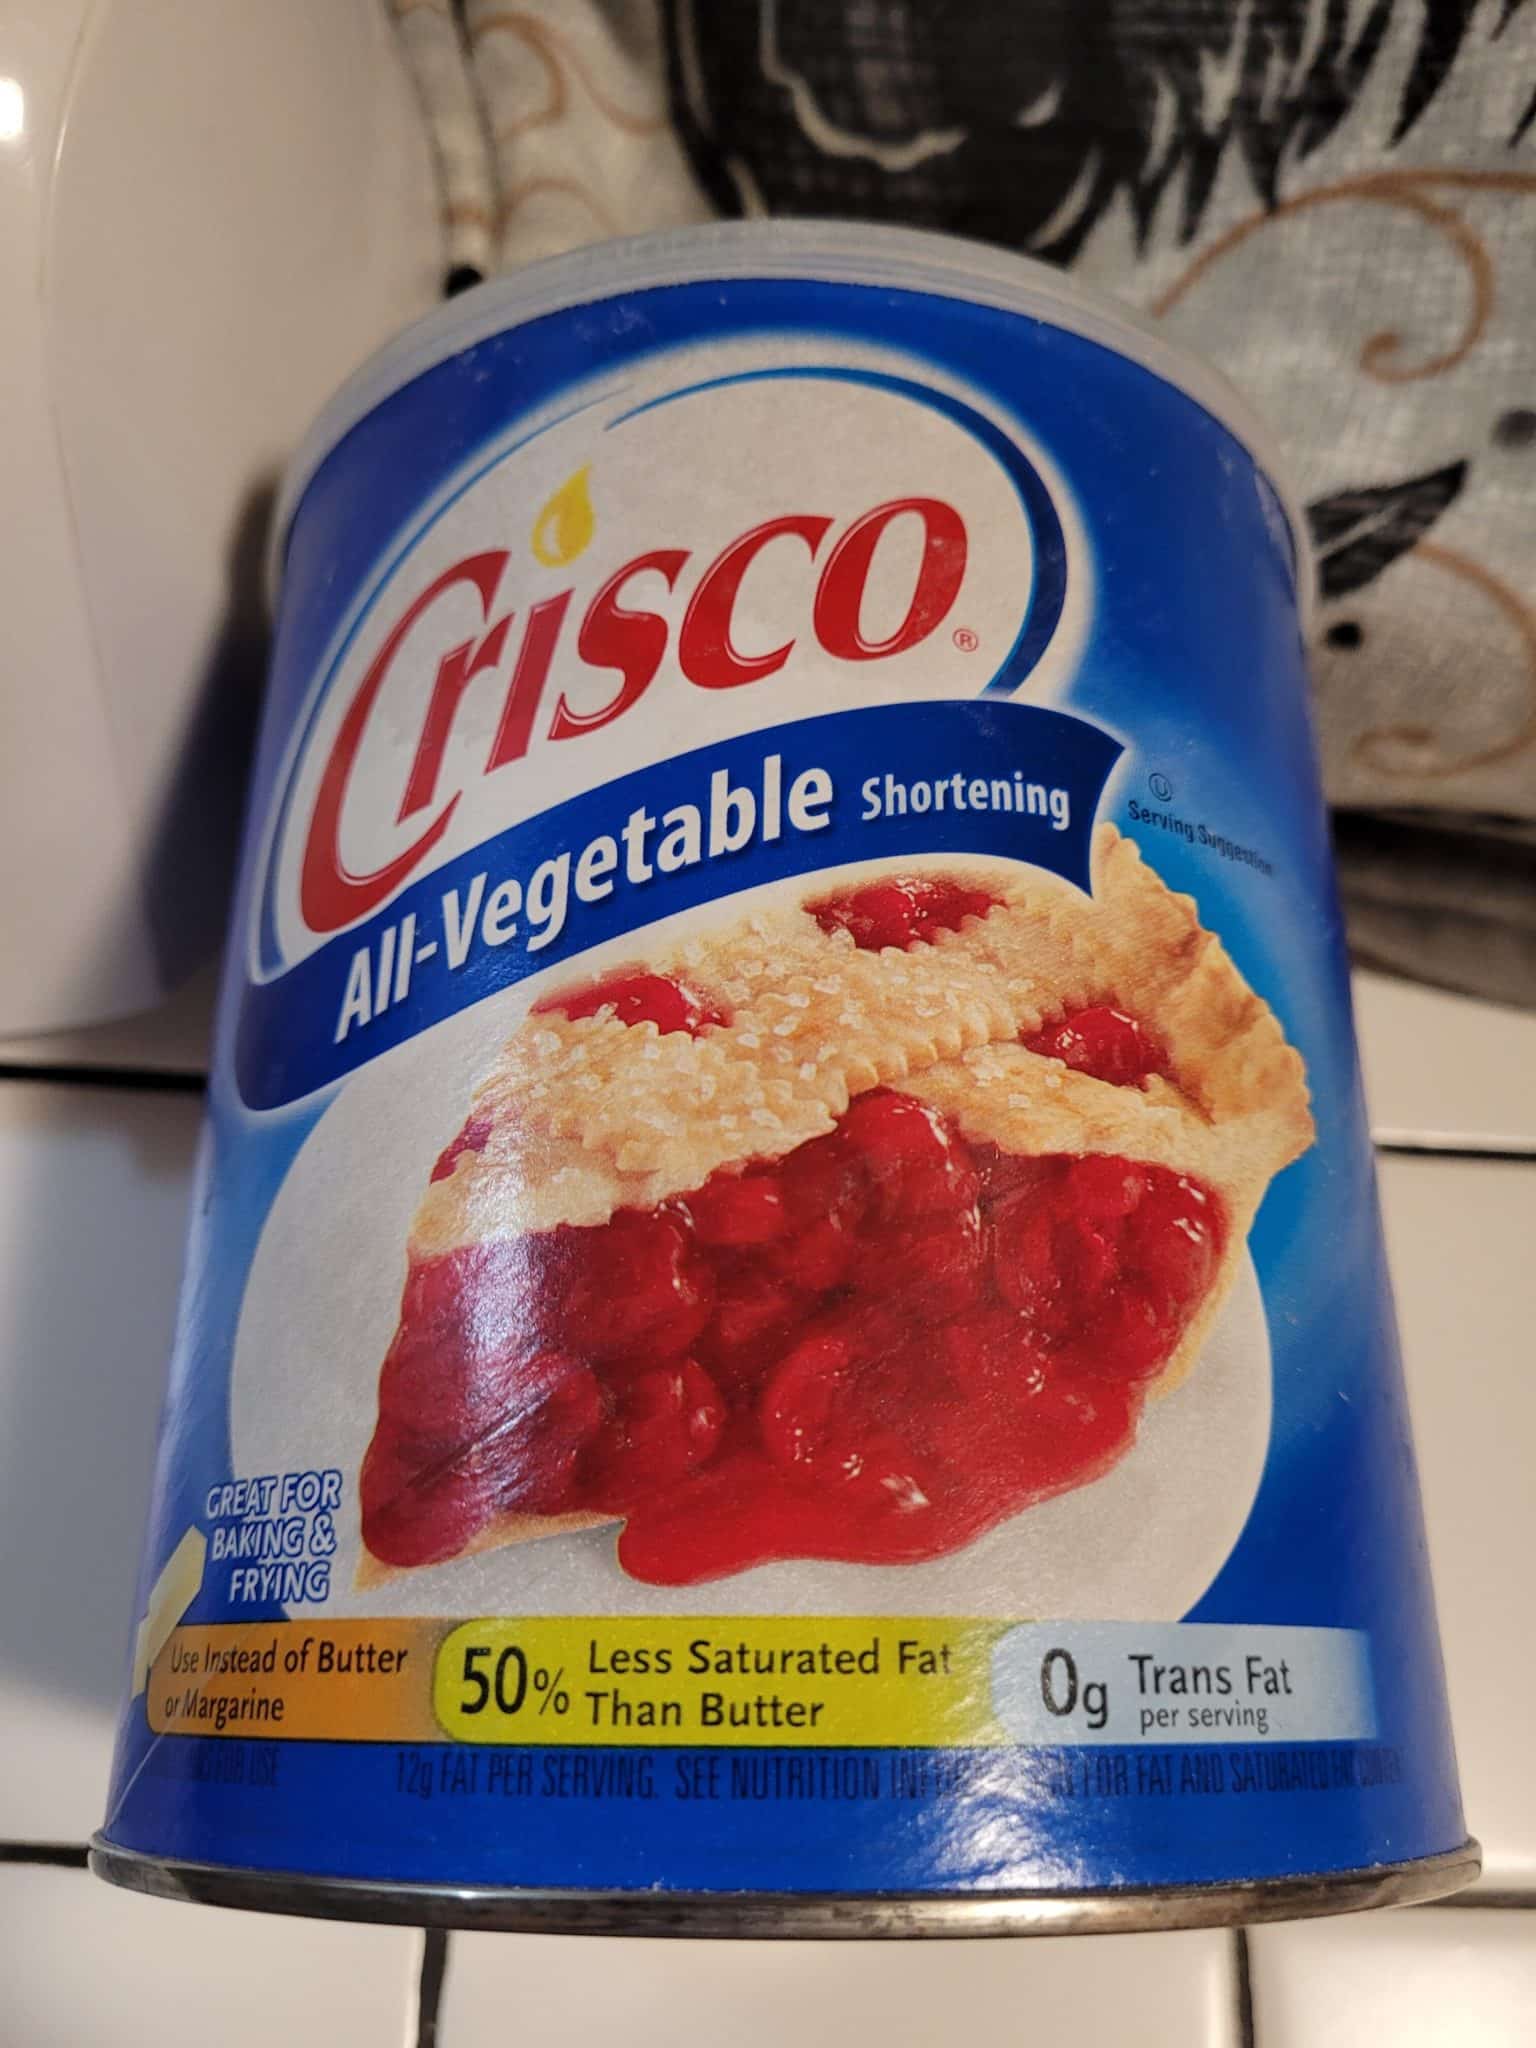 How Long Does Crisco Last?